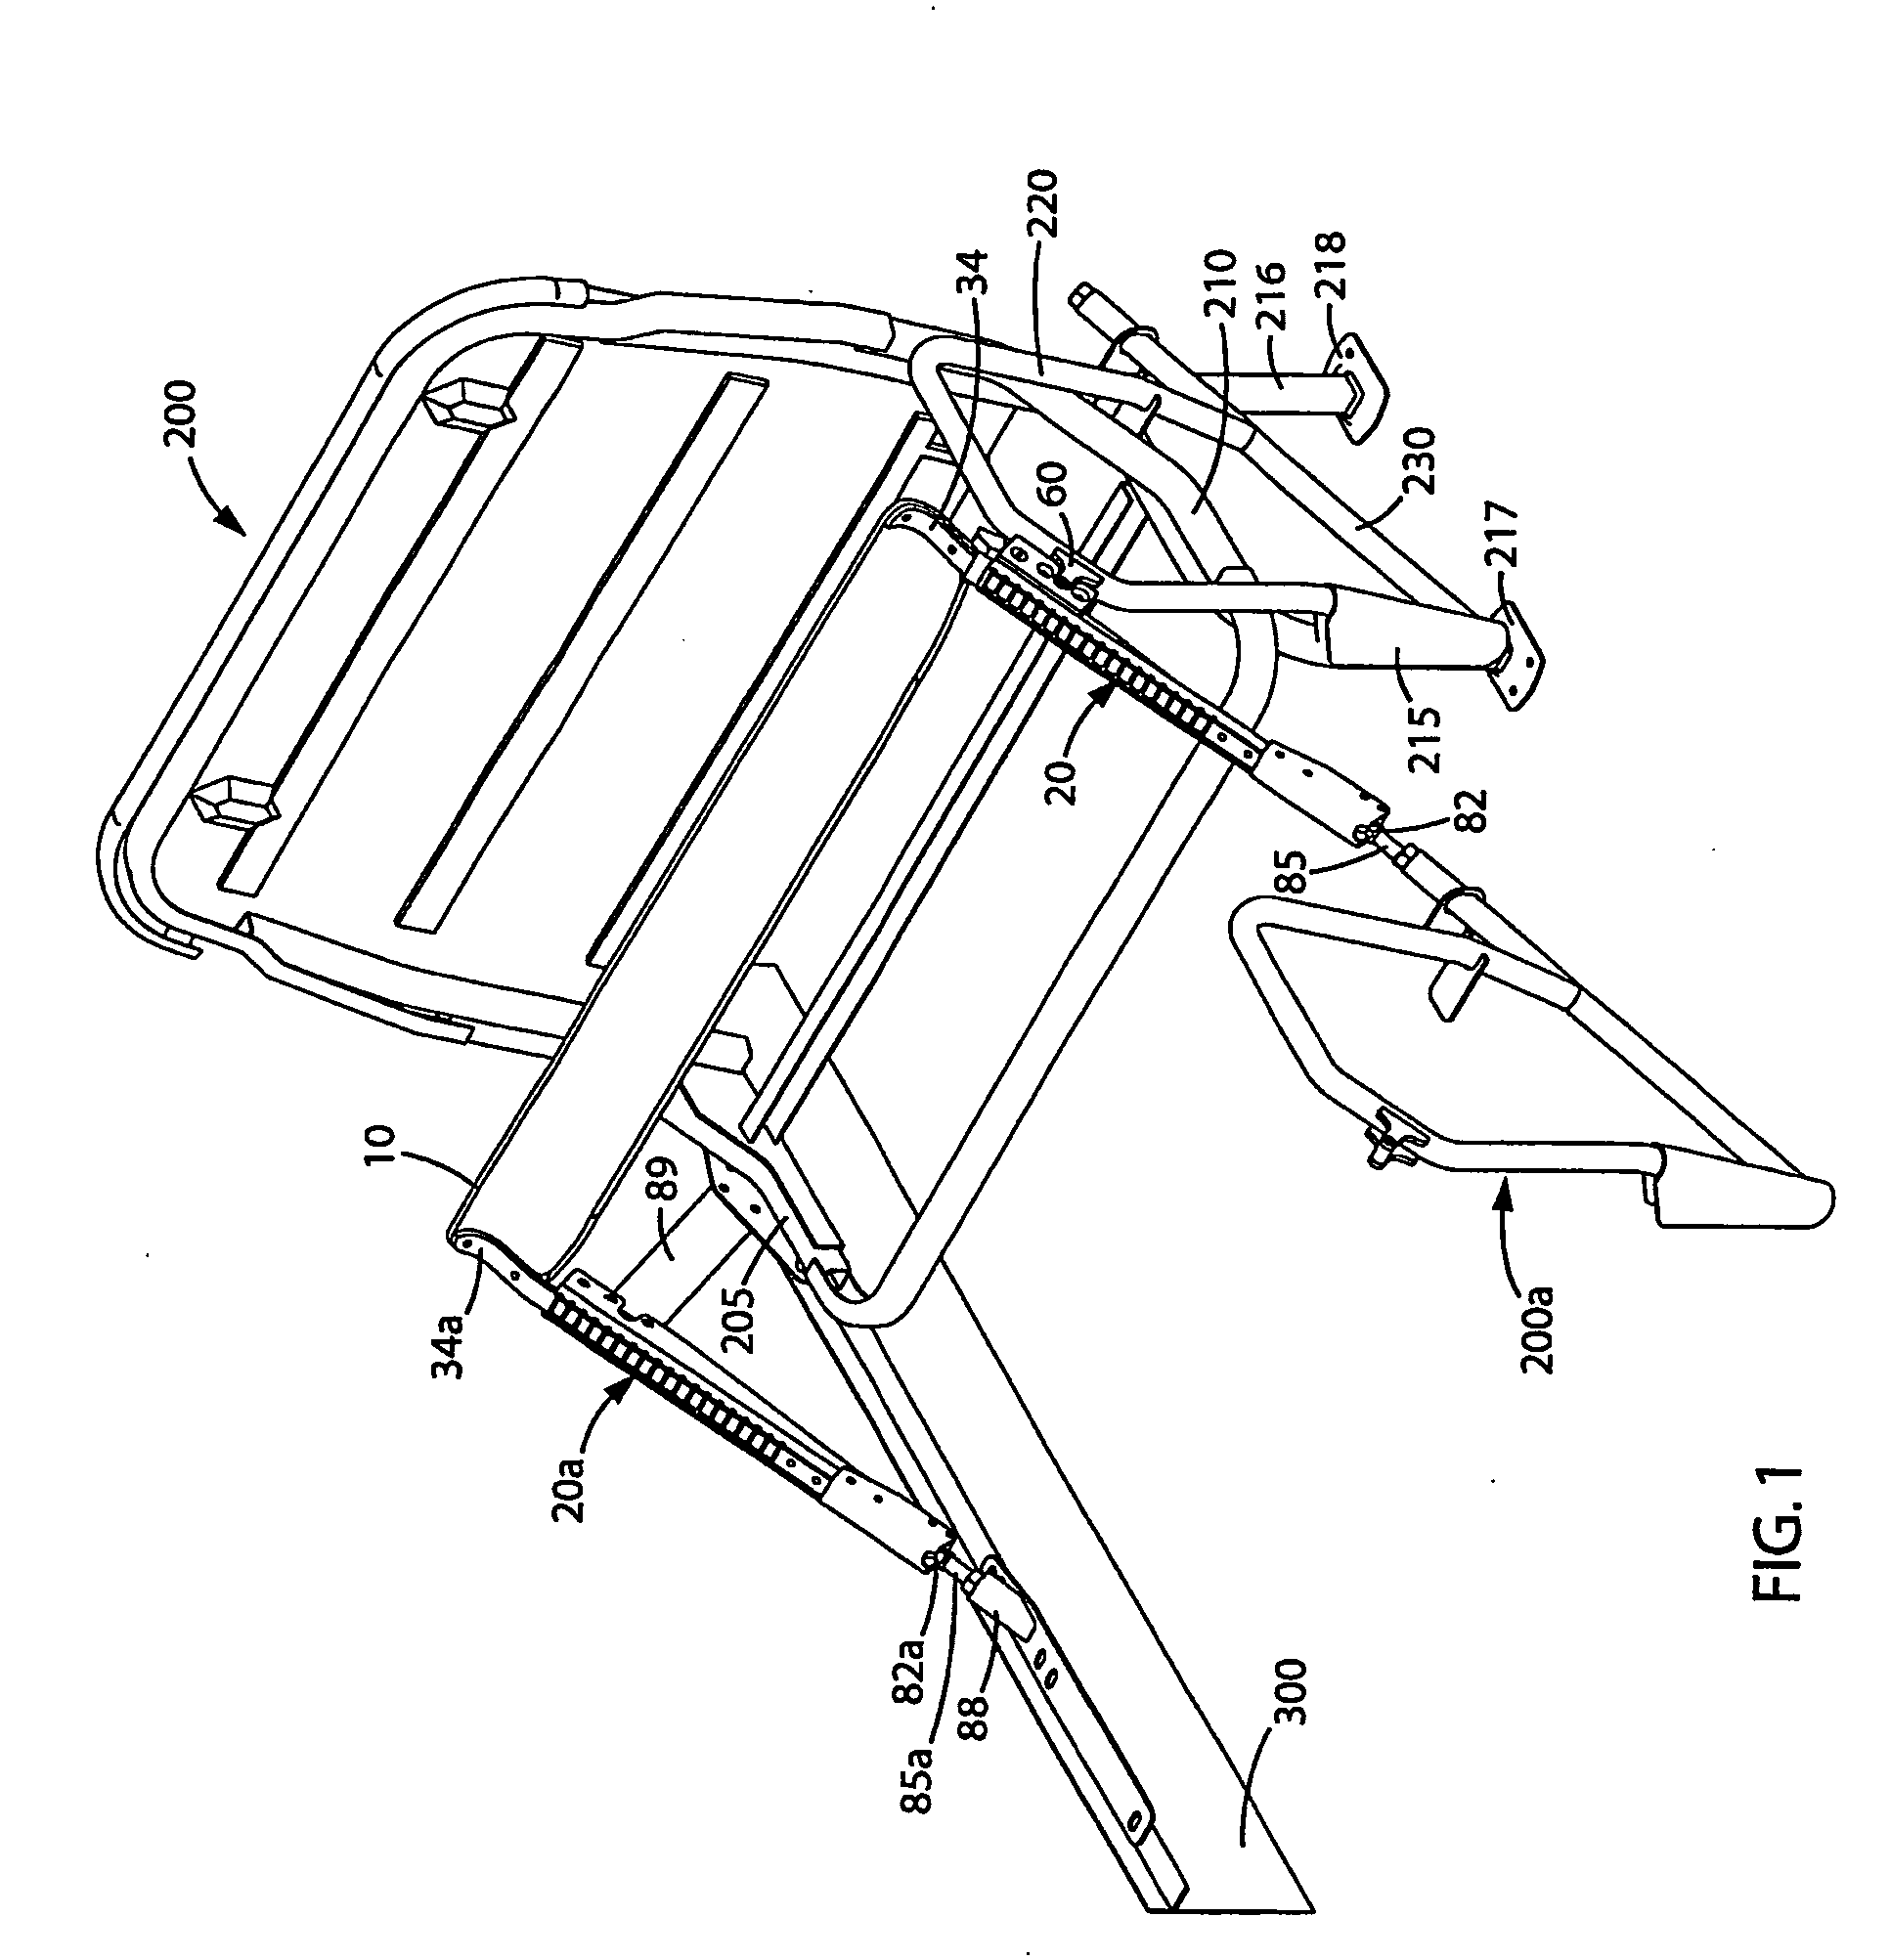 Energy absorption device and passenger safety crossbar system incorporating same